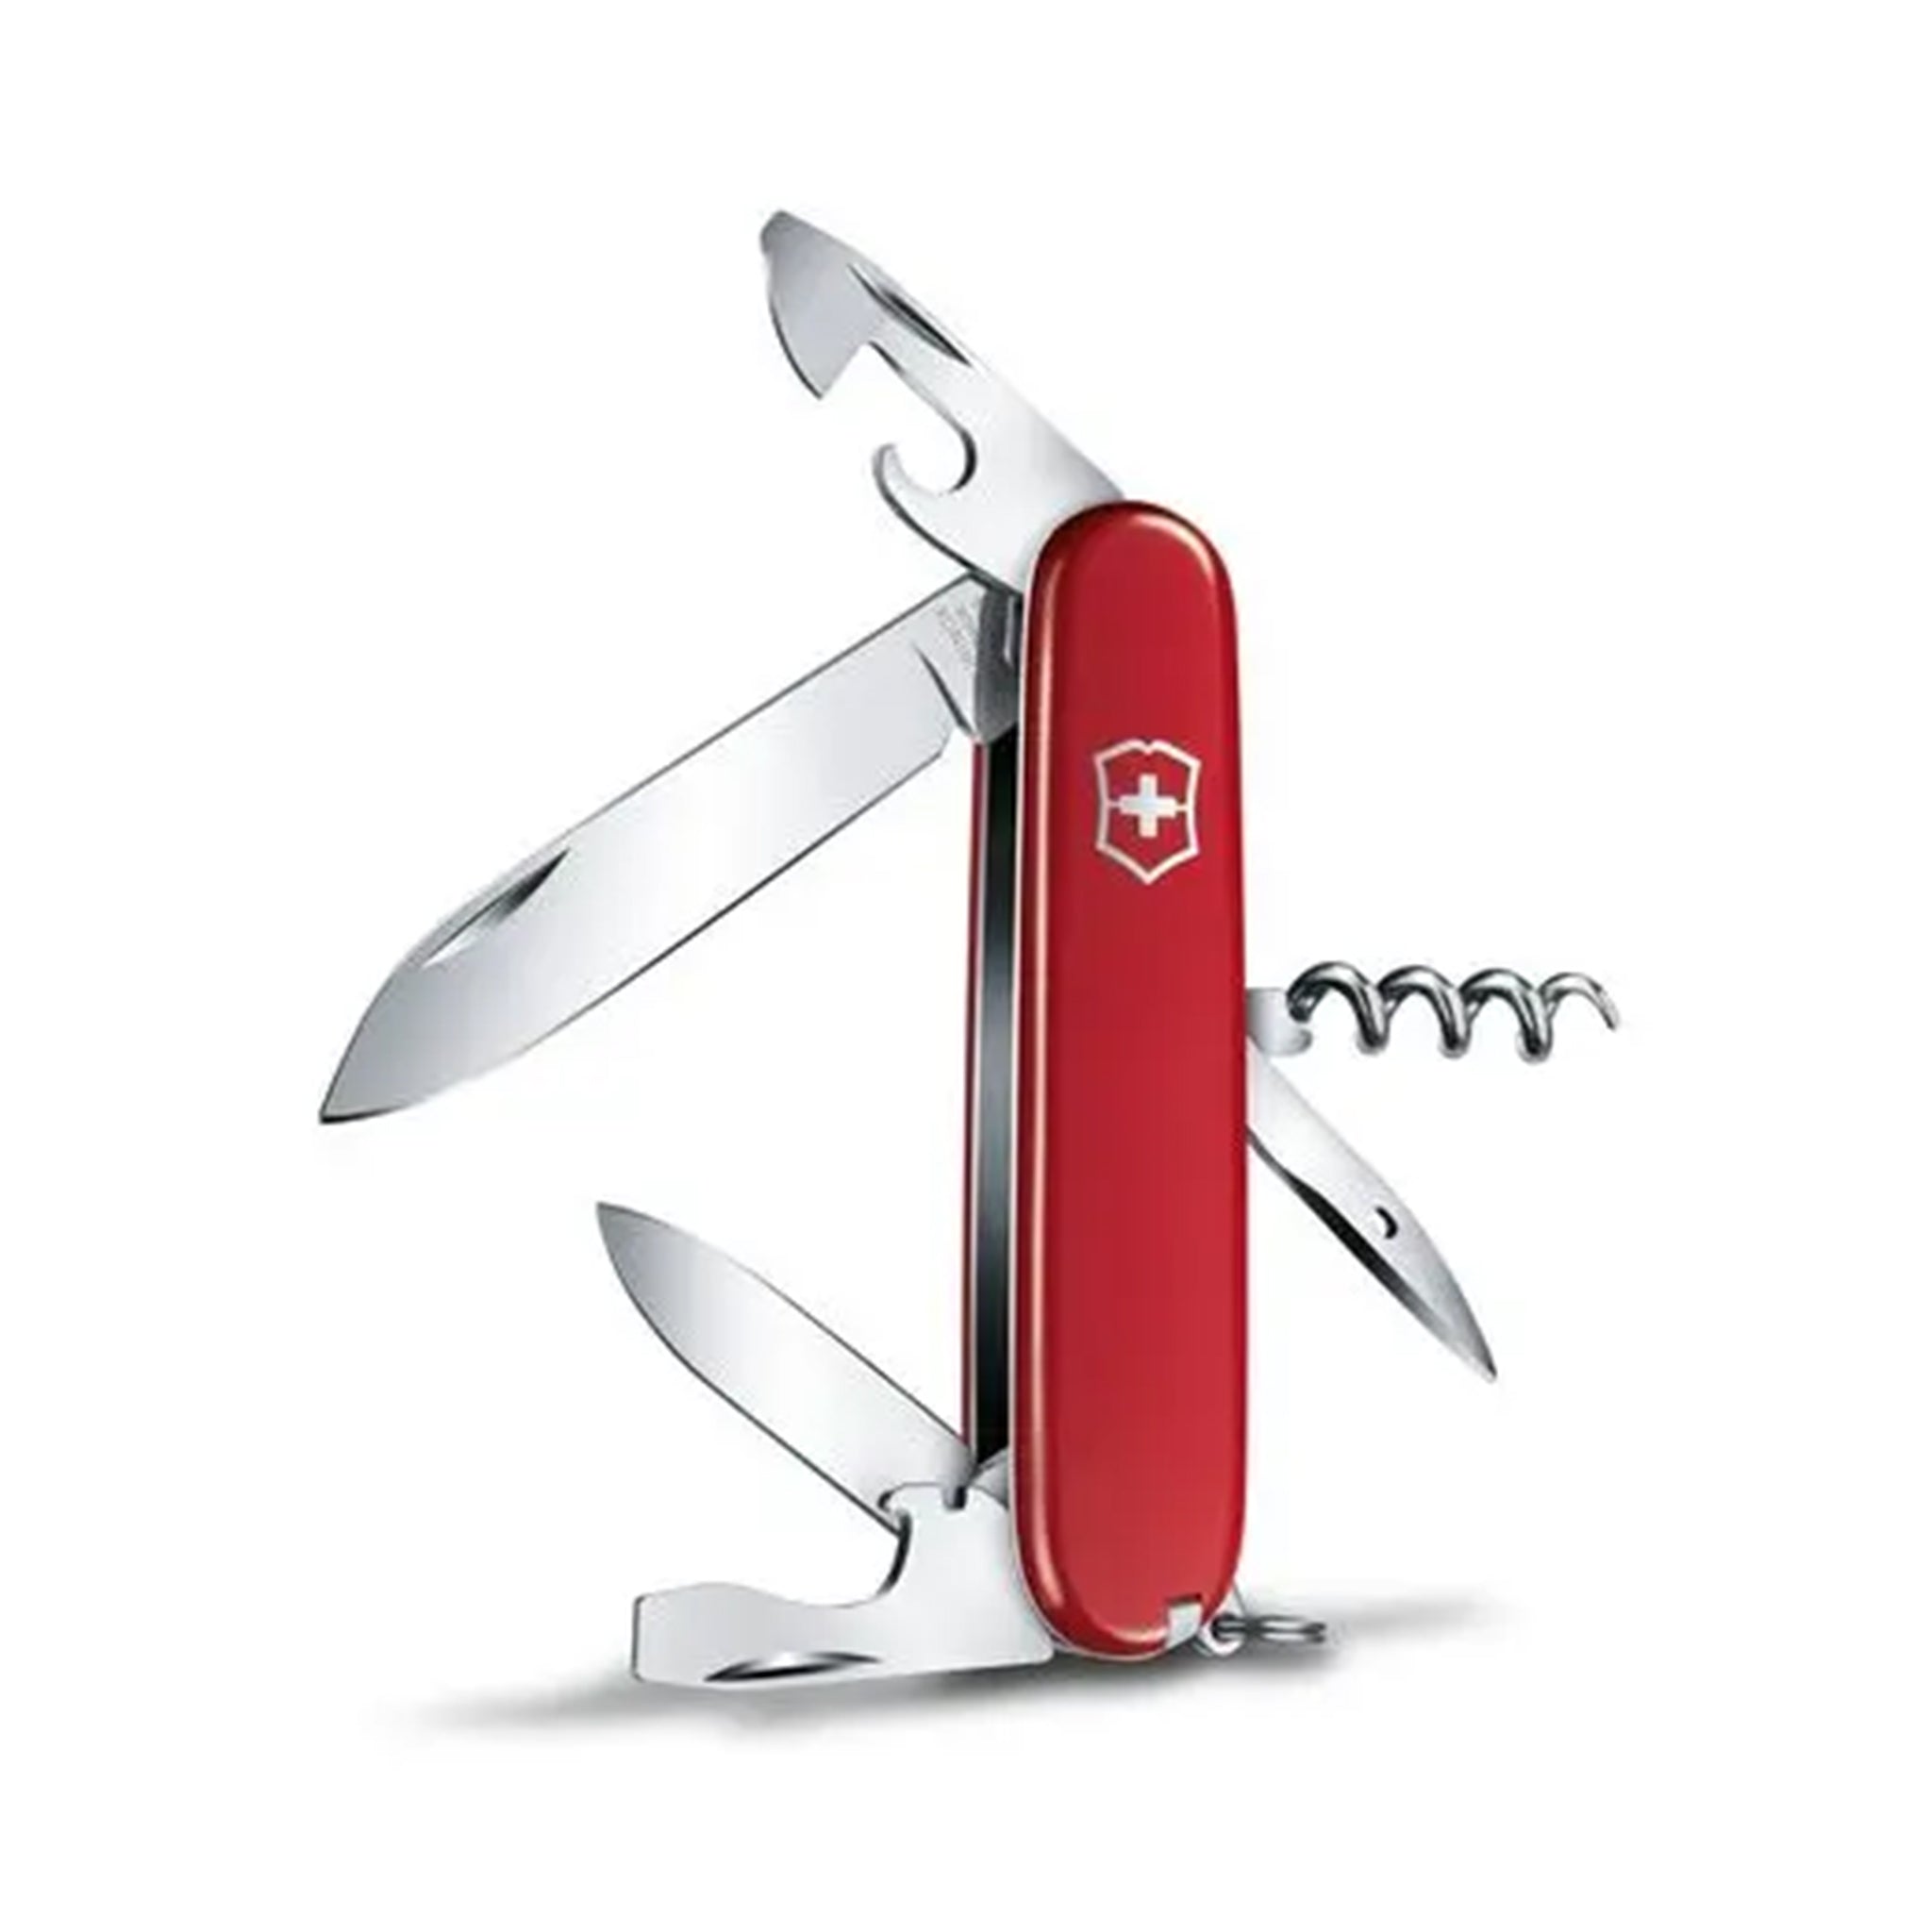 Victorinox Spartan, Swiss pocket knife, red  Advantageously shopping at